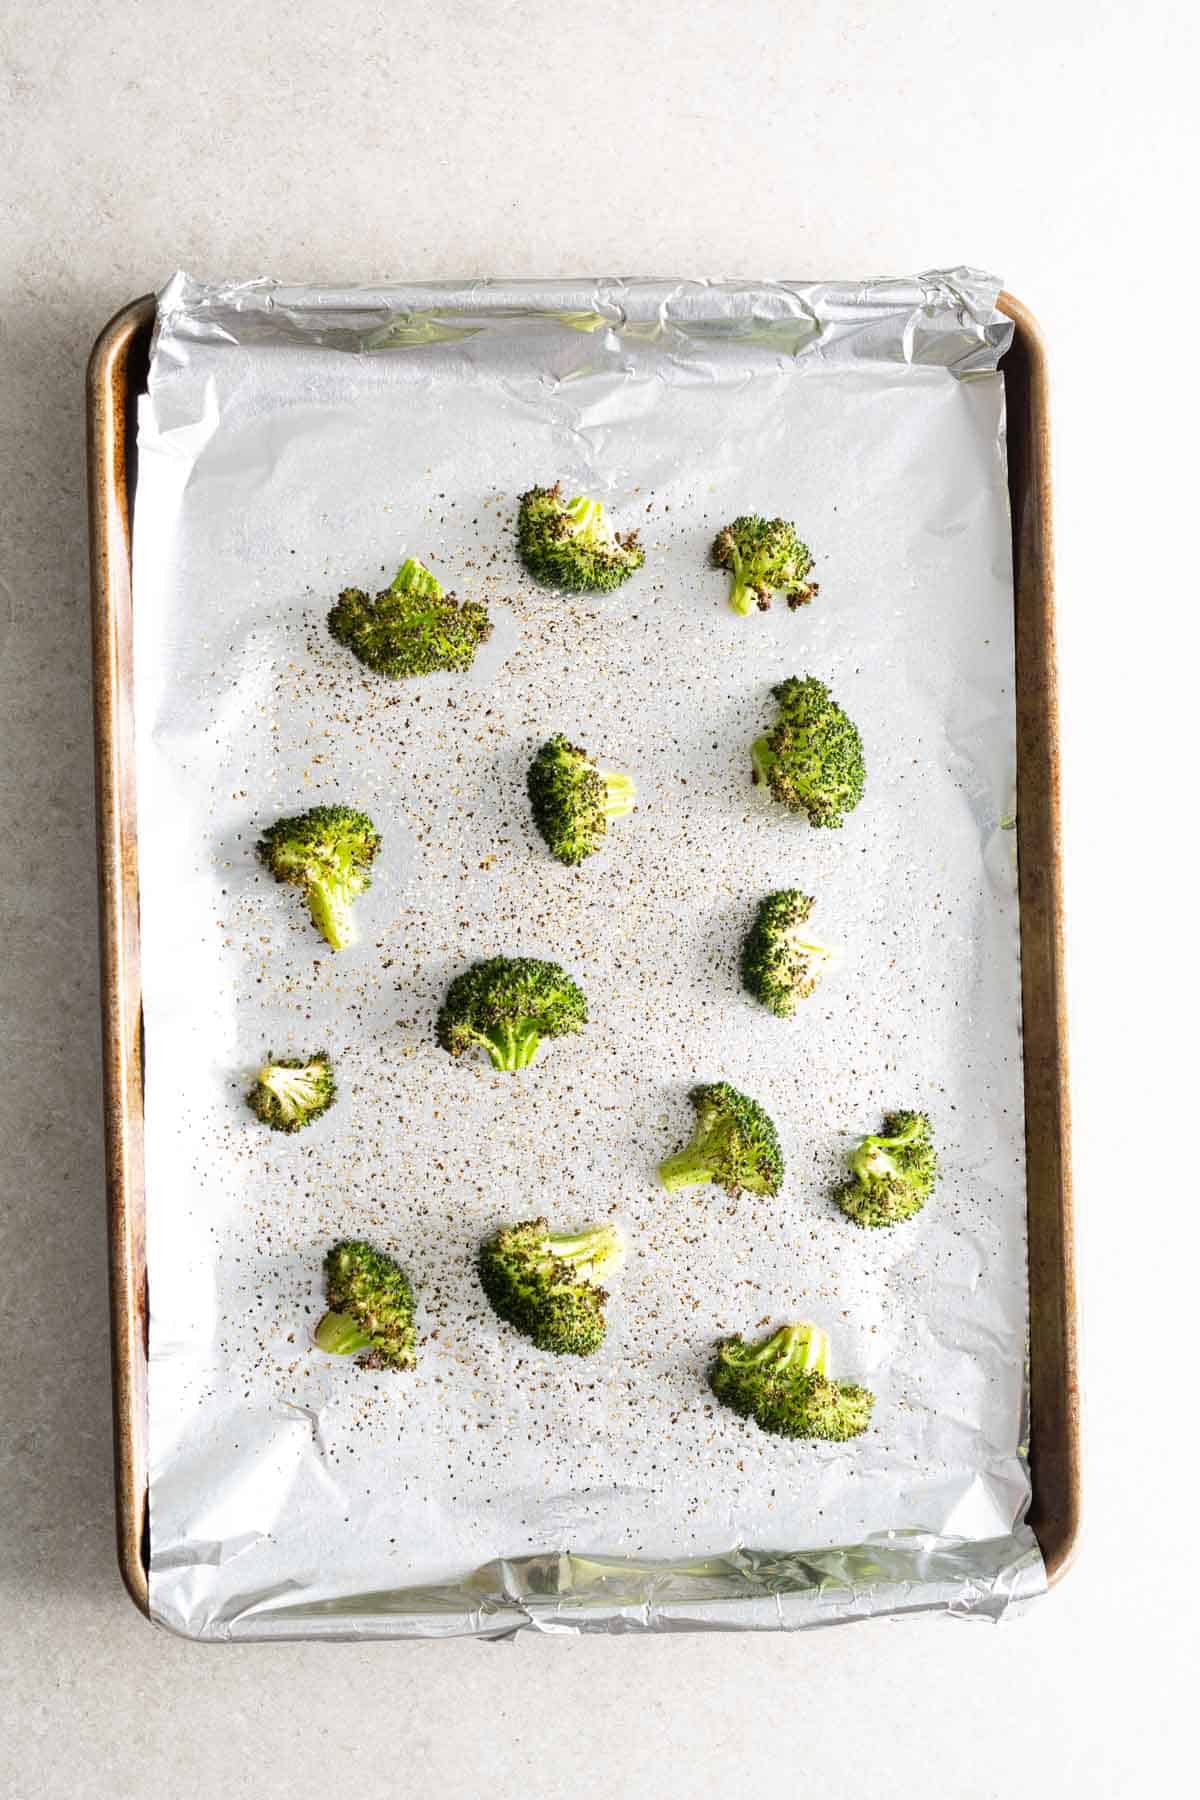 A baking sheet with broccoli on it.